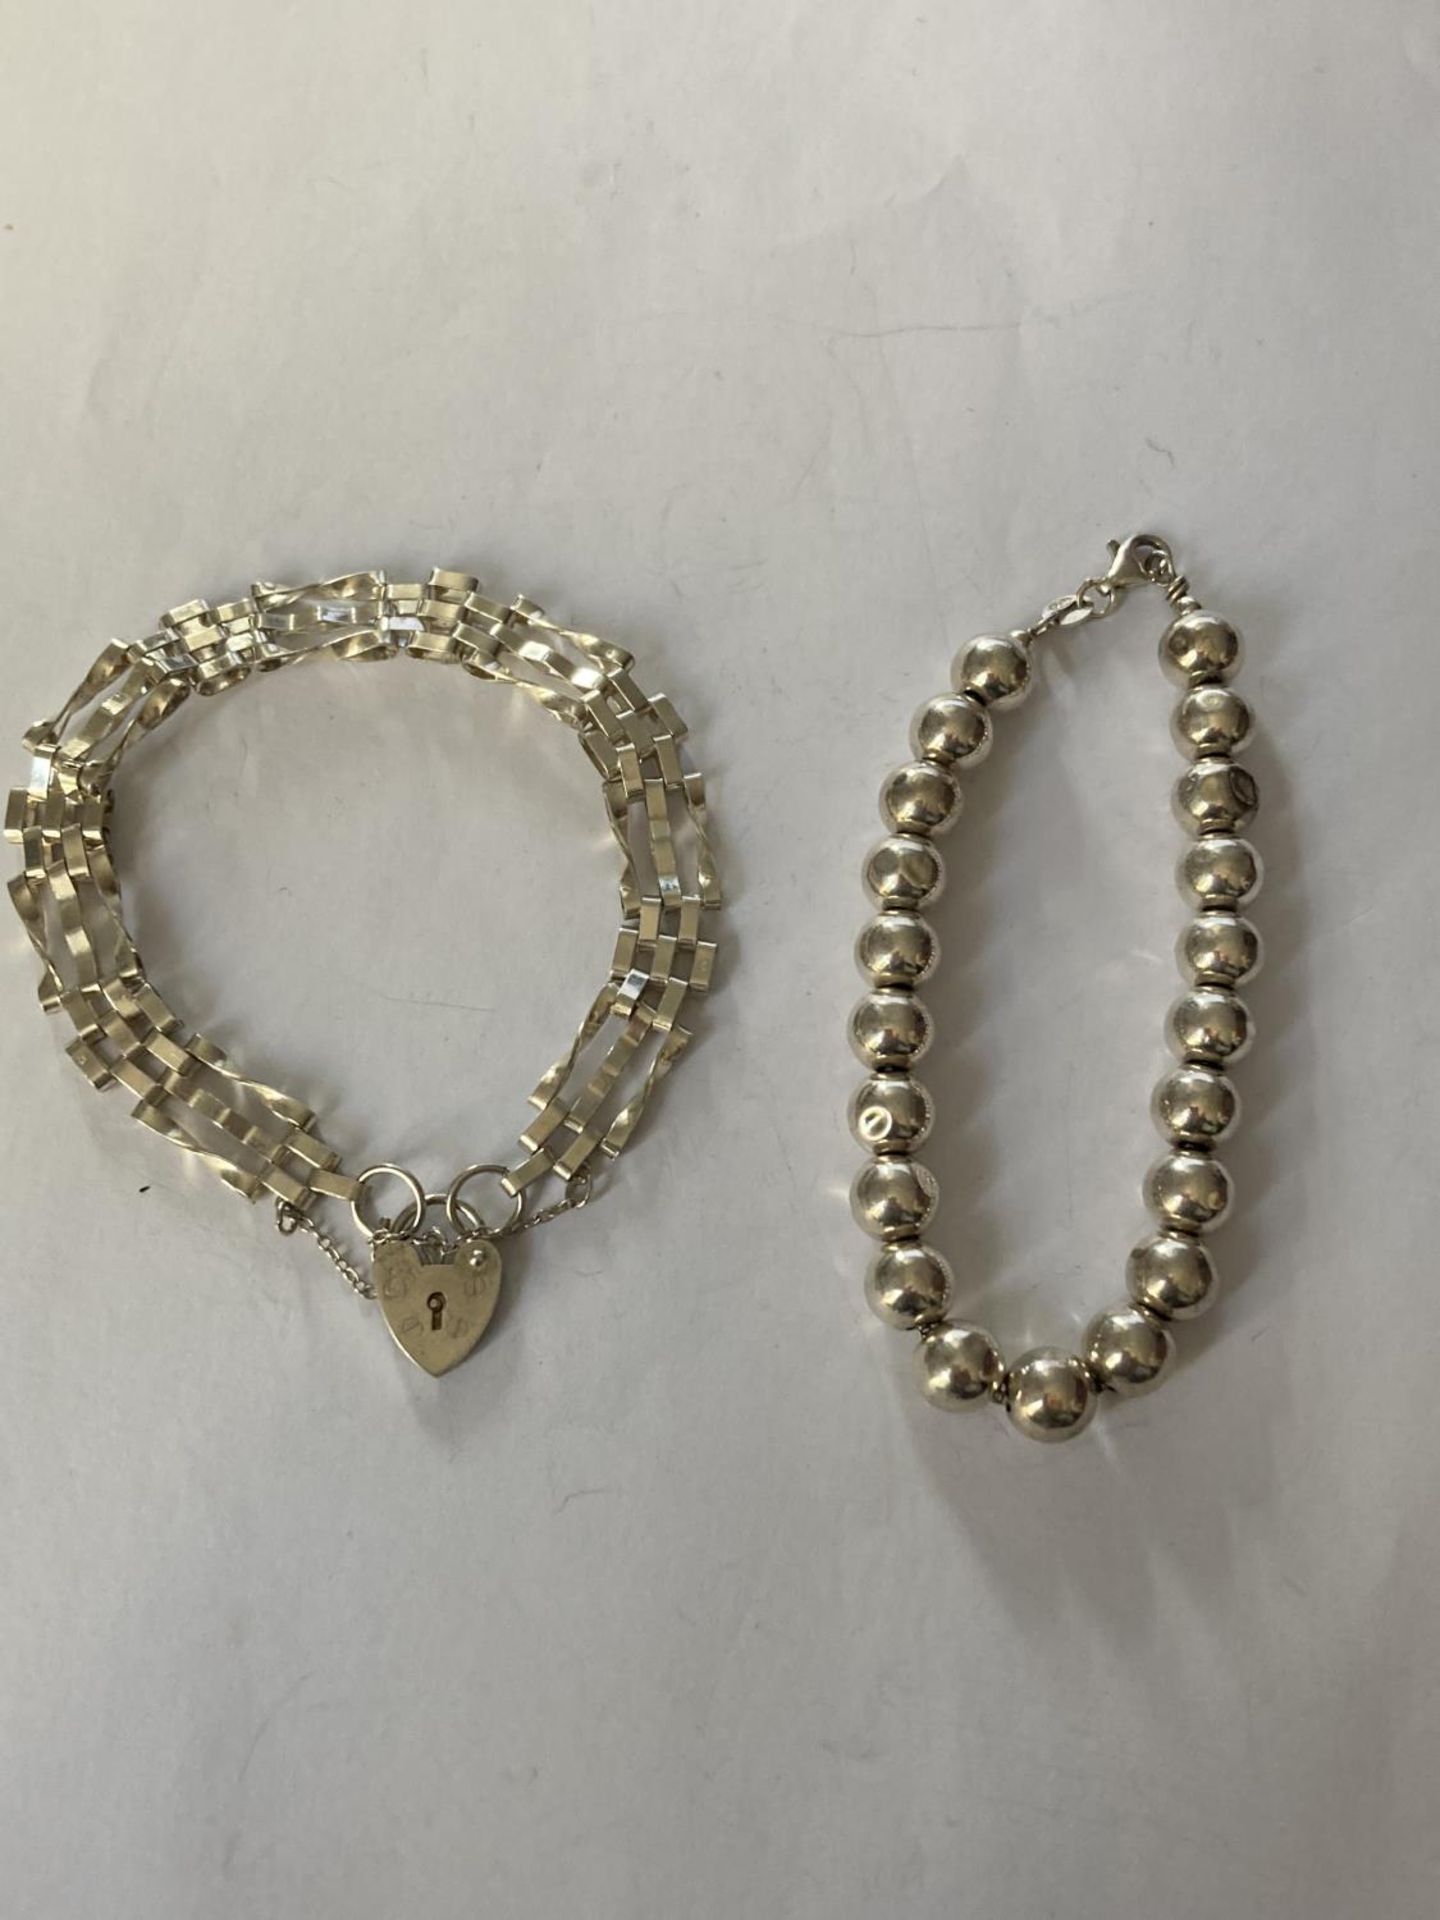 TWO SILVER BRACELETS (BEADS NOT SILVER ONLY THE CHAIN)